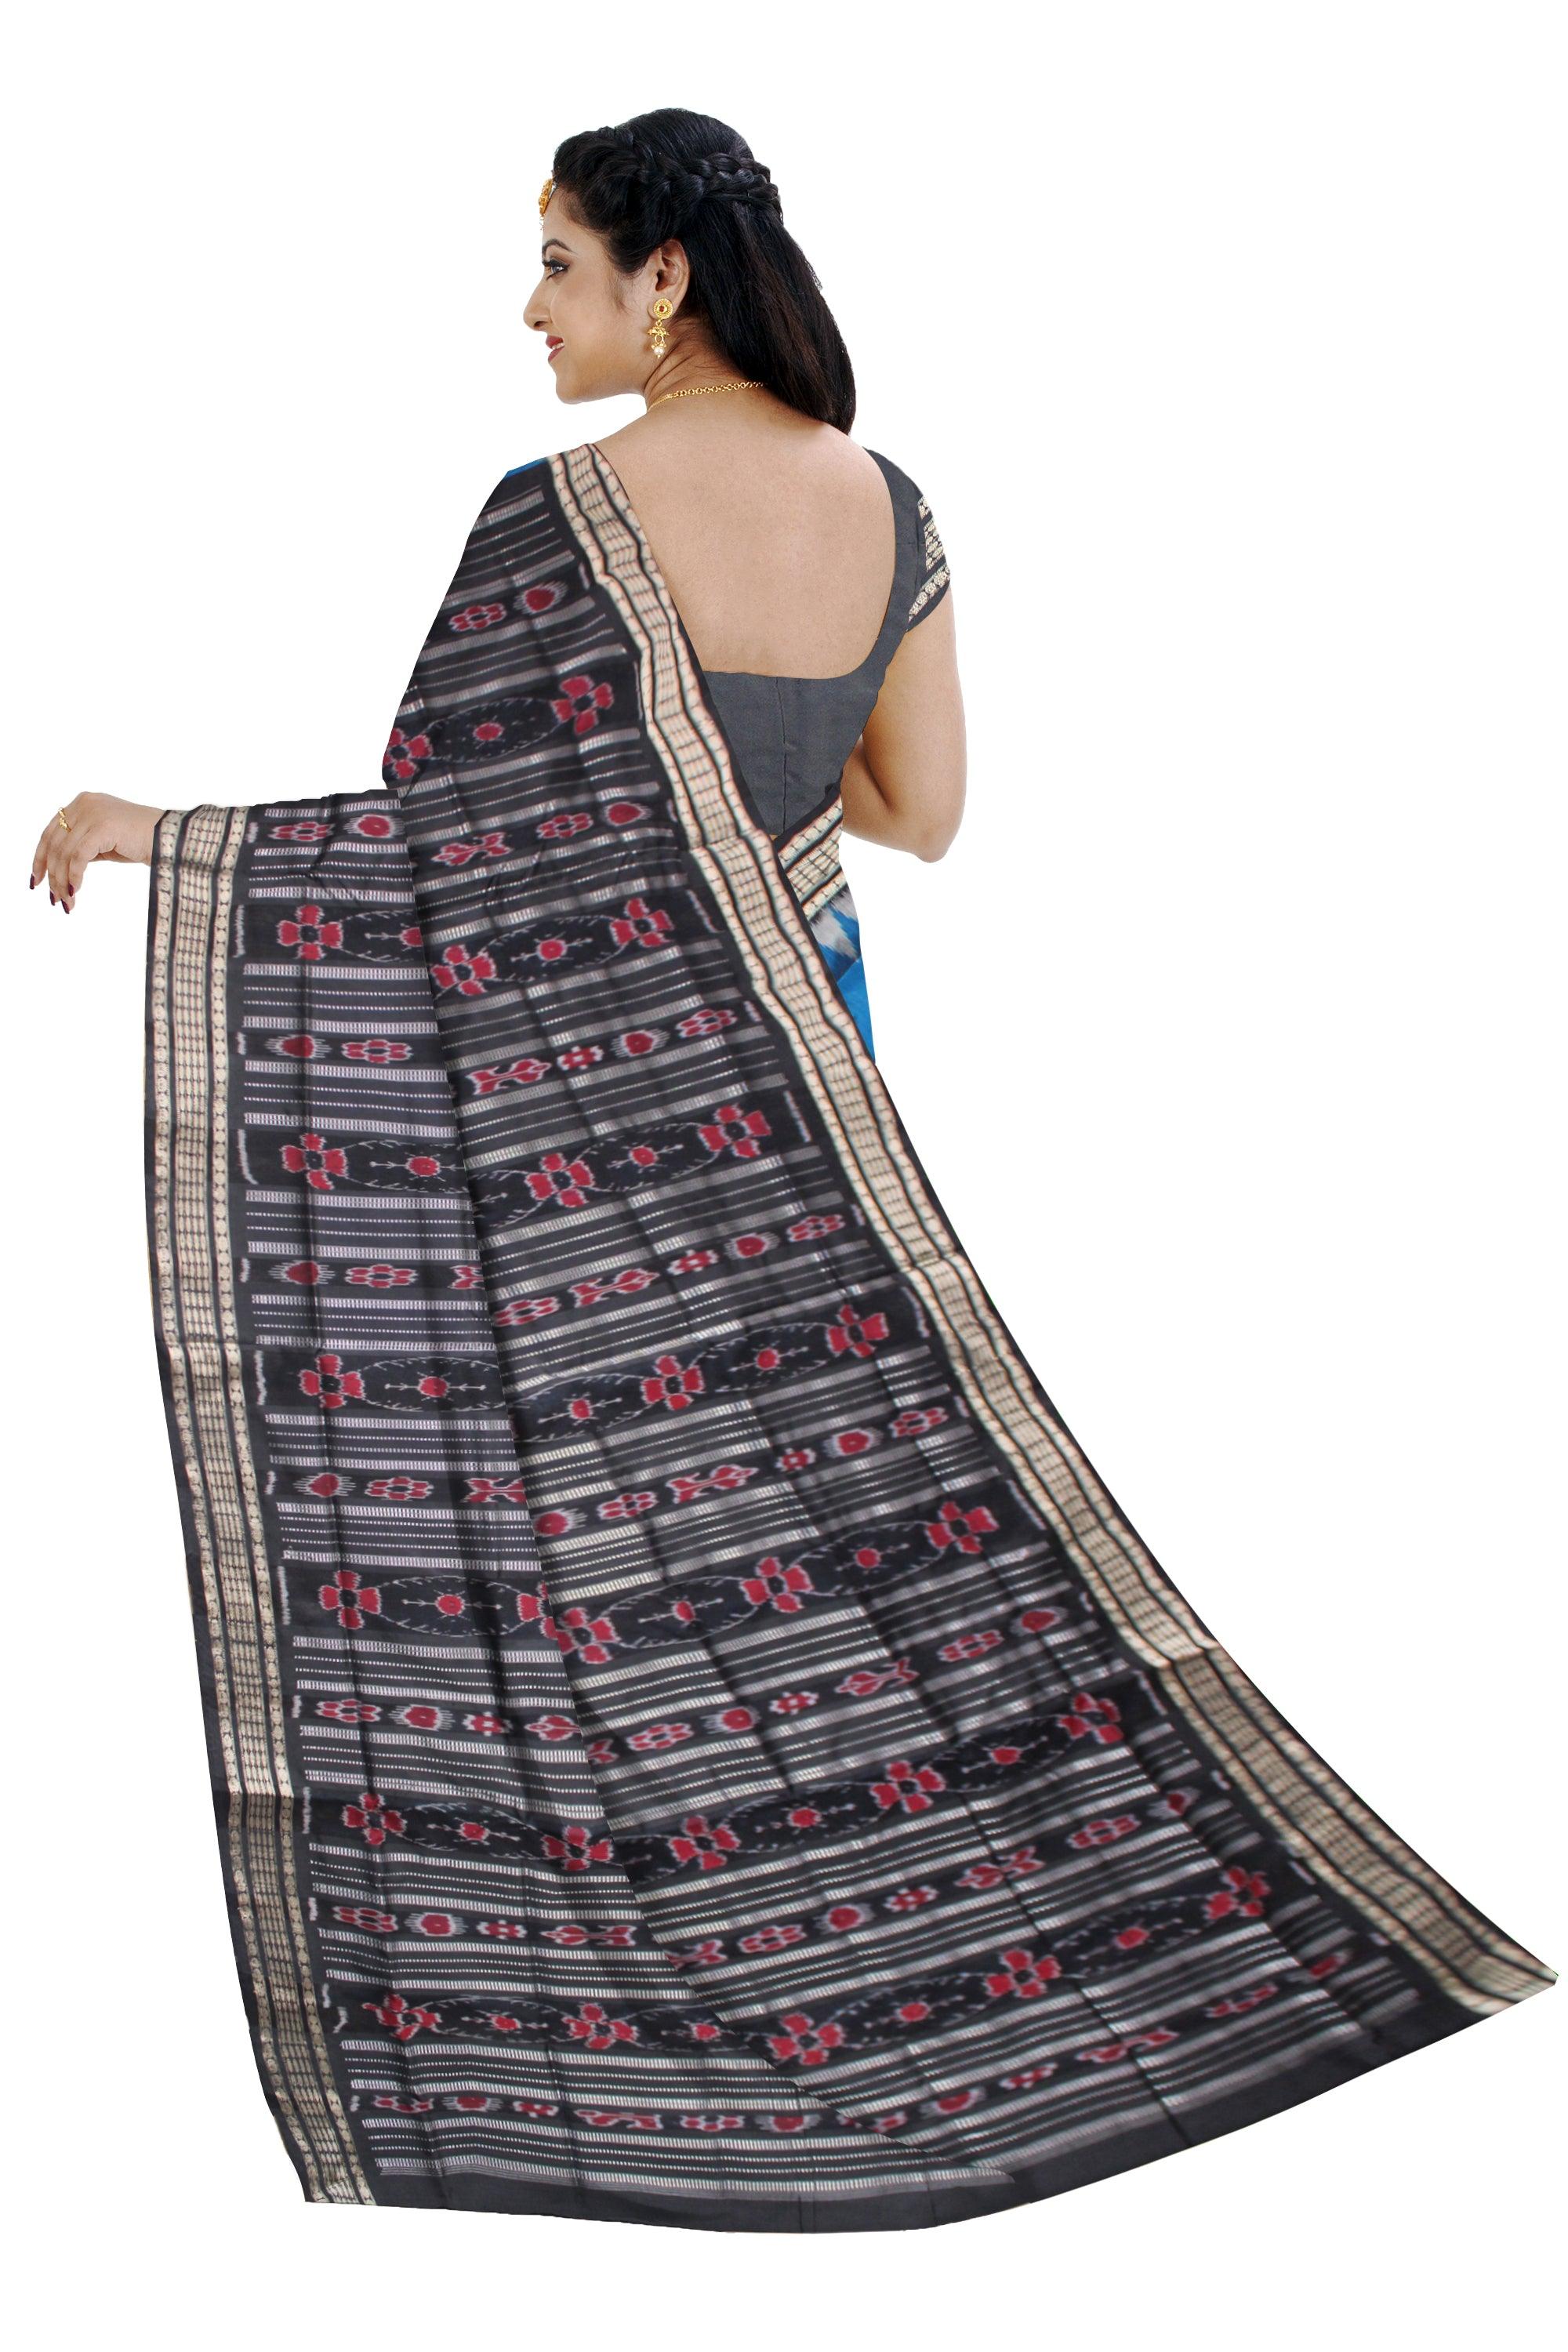 NEW PATTERN BORDER BLUE AND BLACK COLOR BOOTY PATTERN PATA SAREE WITH BLOUSE PIECE. - Koshali Arts & Crafts Enterprise